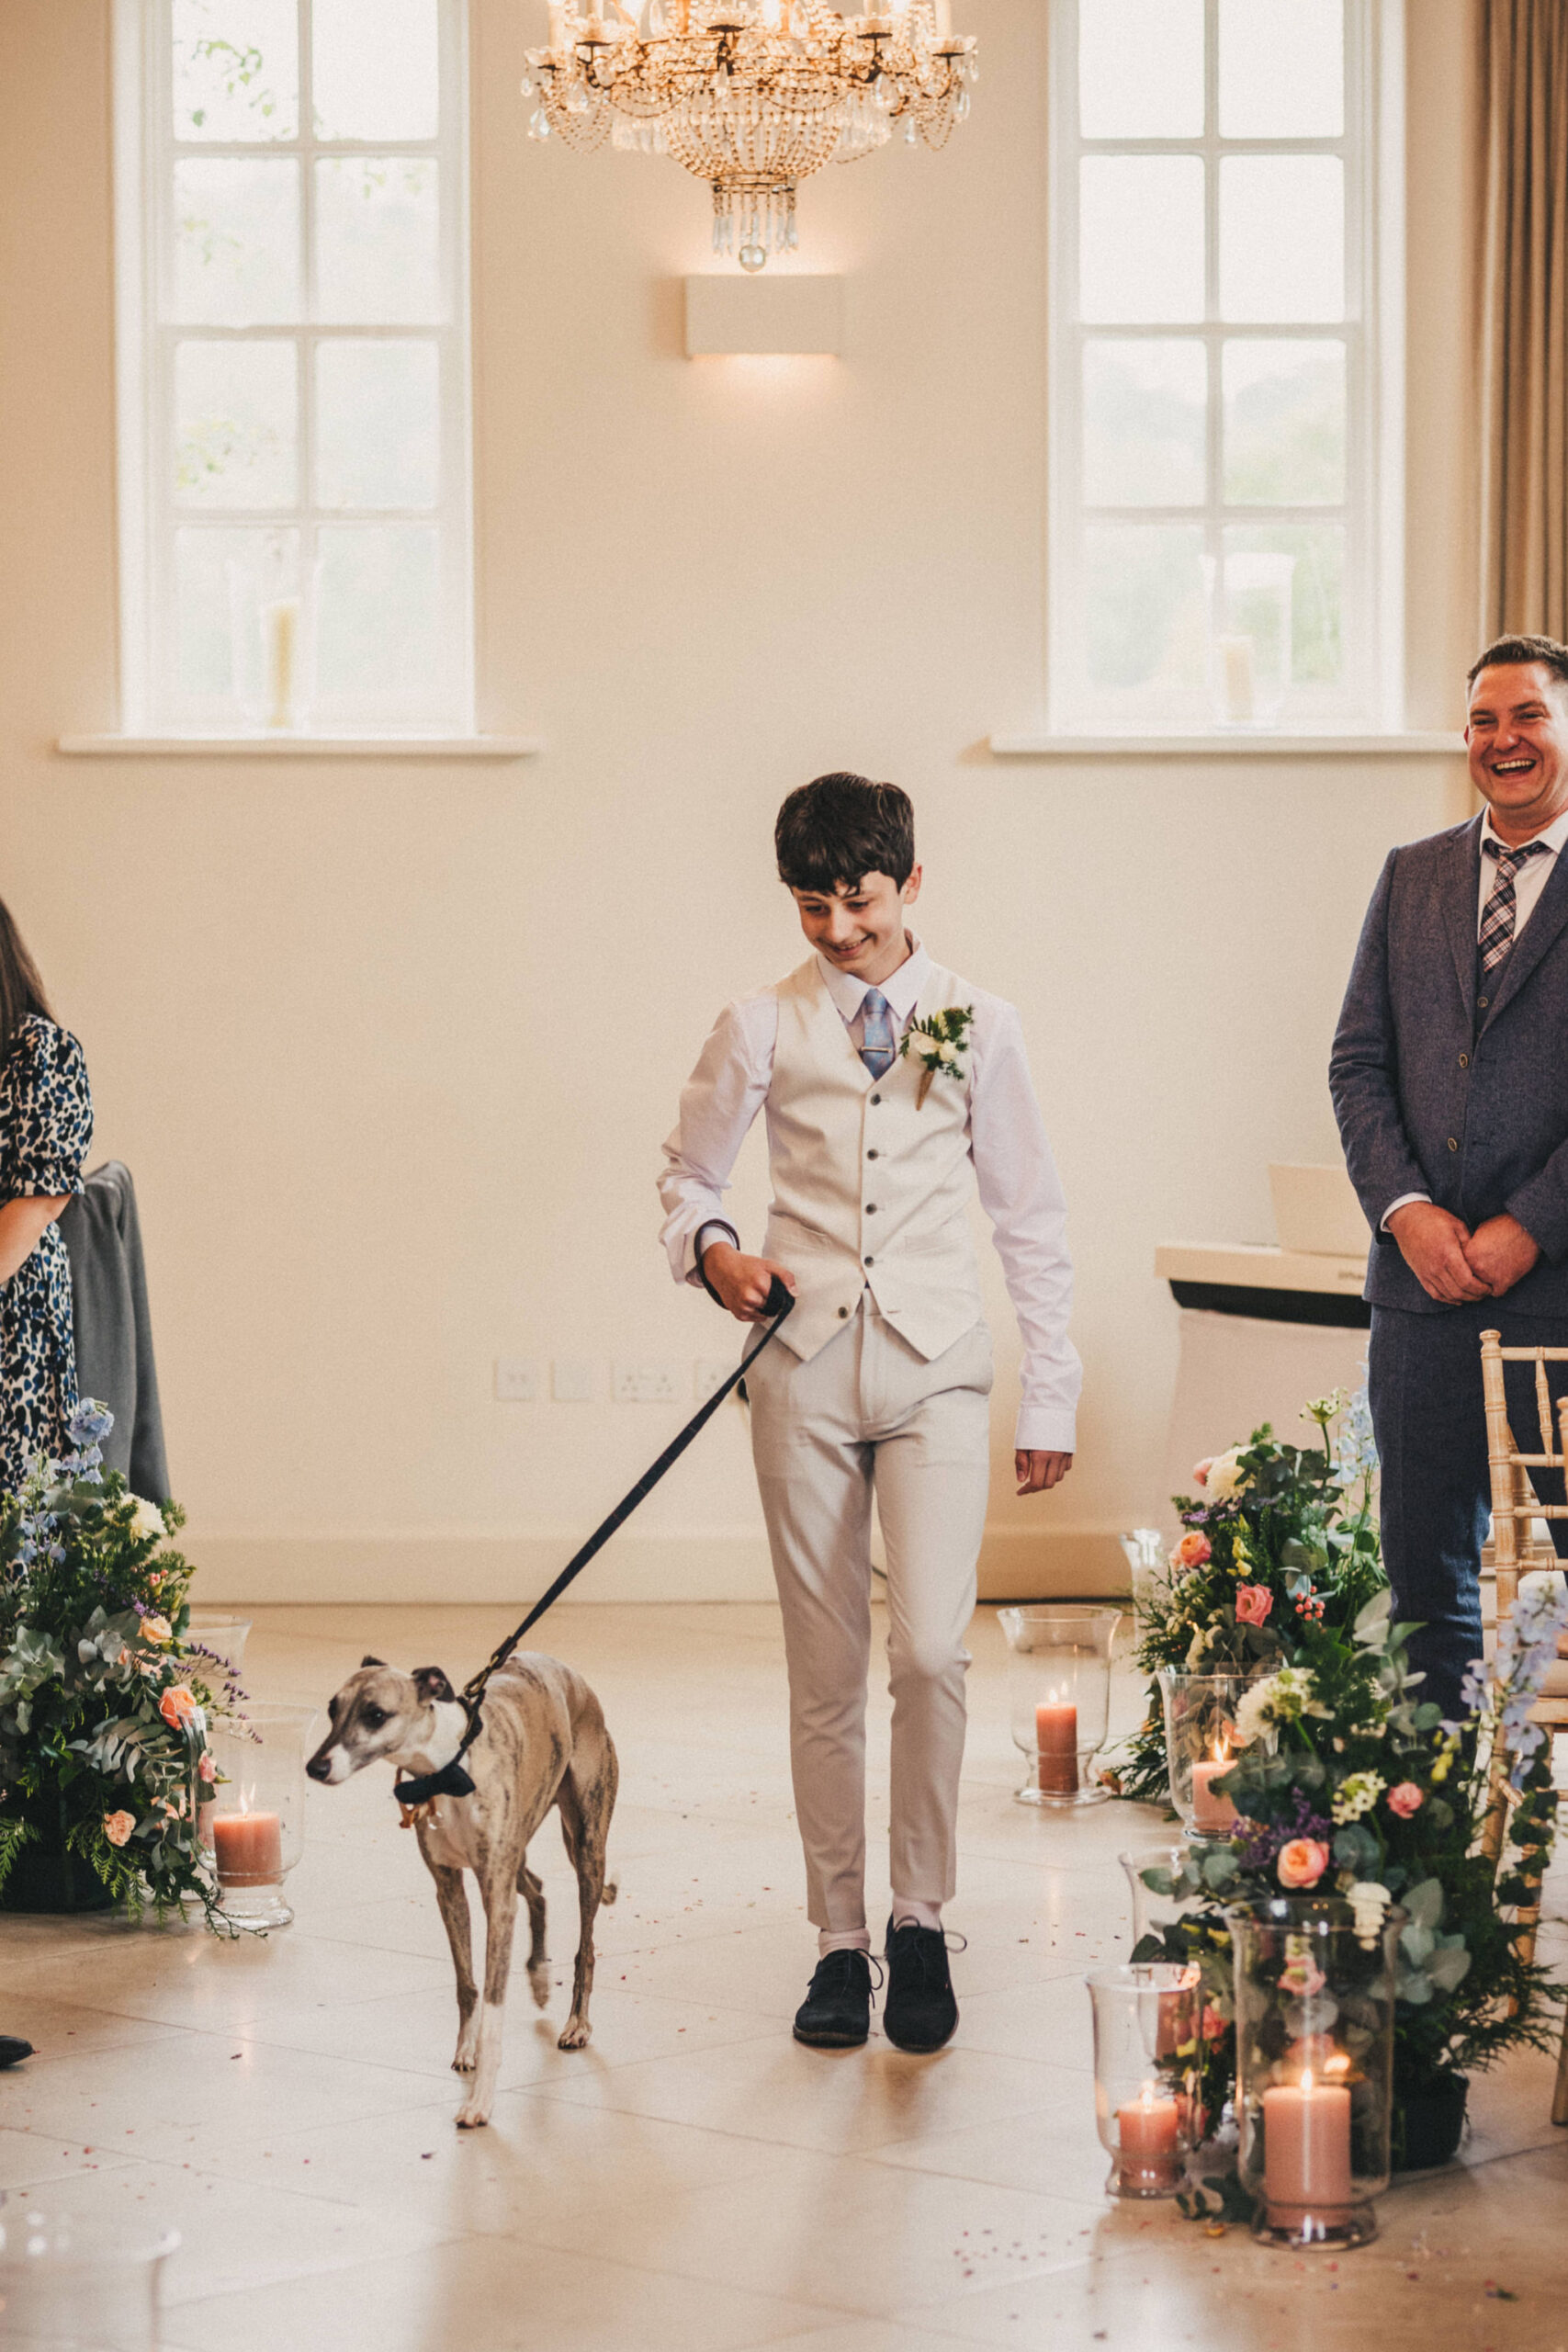 A teenage boy with a white wedding suit walks a grey whippet dog down the aisle of a room with a white flagstone floor with floral arrangement set on the floor at intervals along the rows of chairs